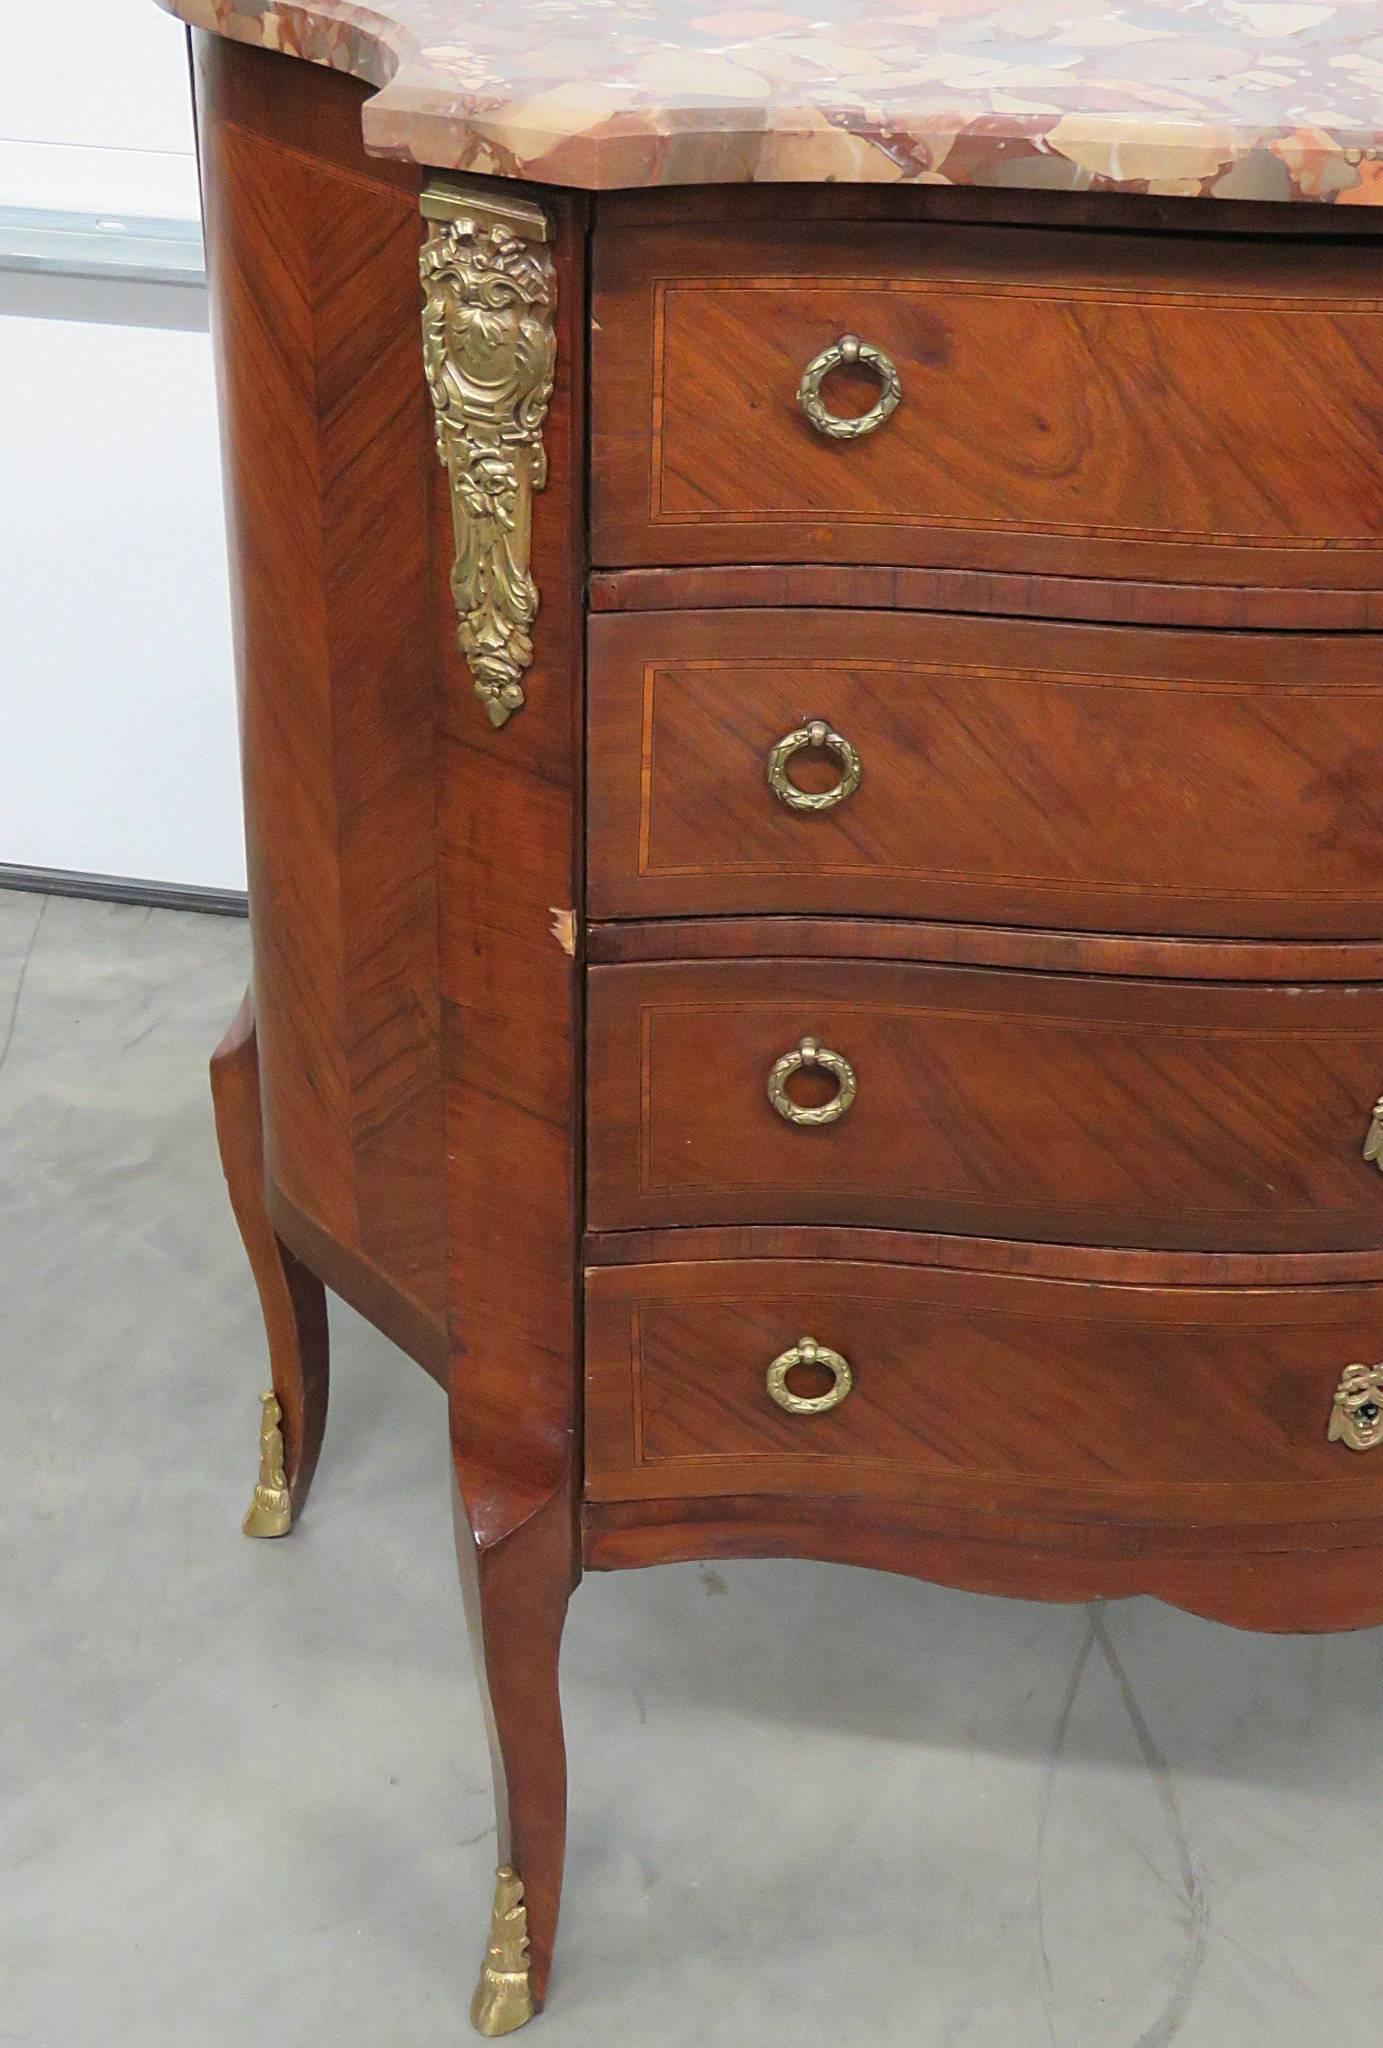 19th century Jansen style marble-top commode. Four drawers with bronze accents.